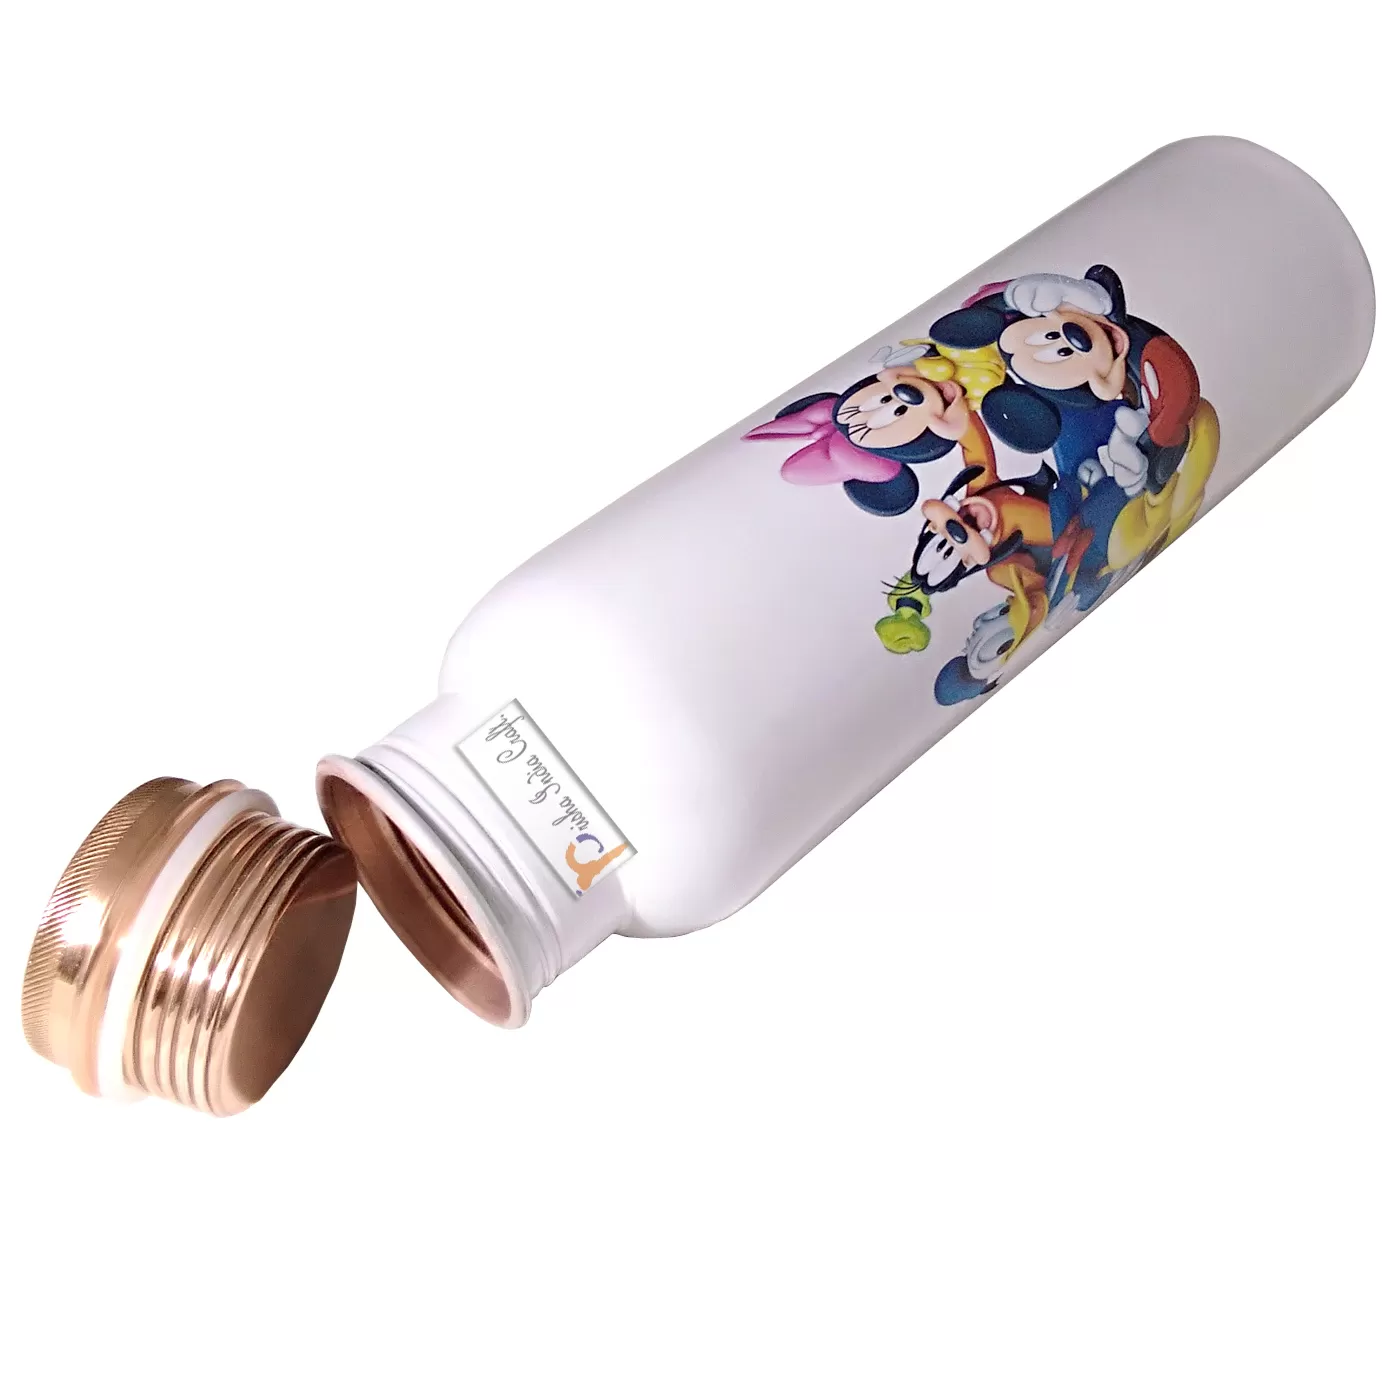 Digital Printed Pure Copper Water Bottle Kids School Water Bottle Mickey Mouse and Donald Design, 1000 ML, 2 image